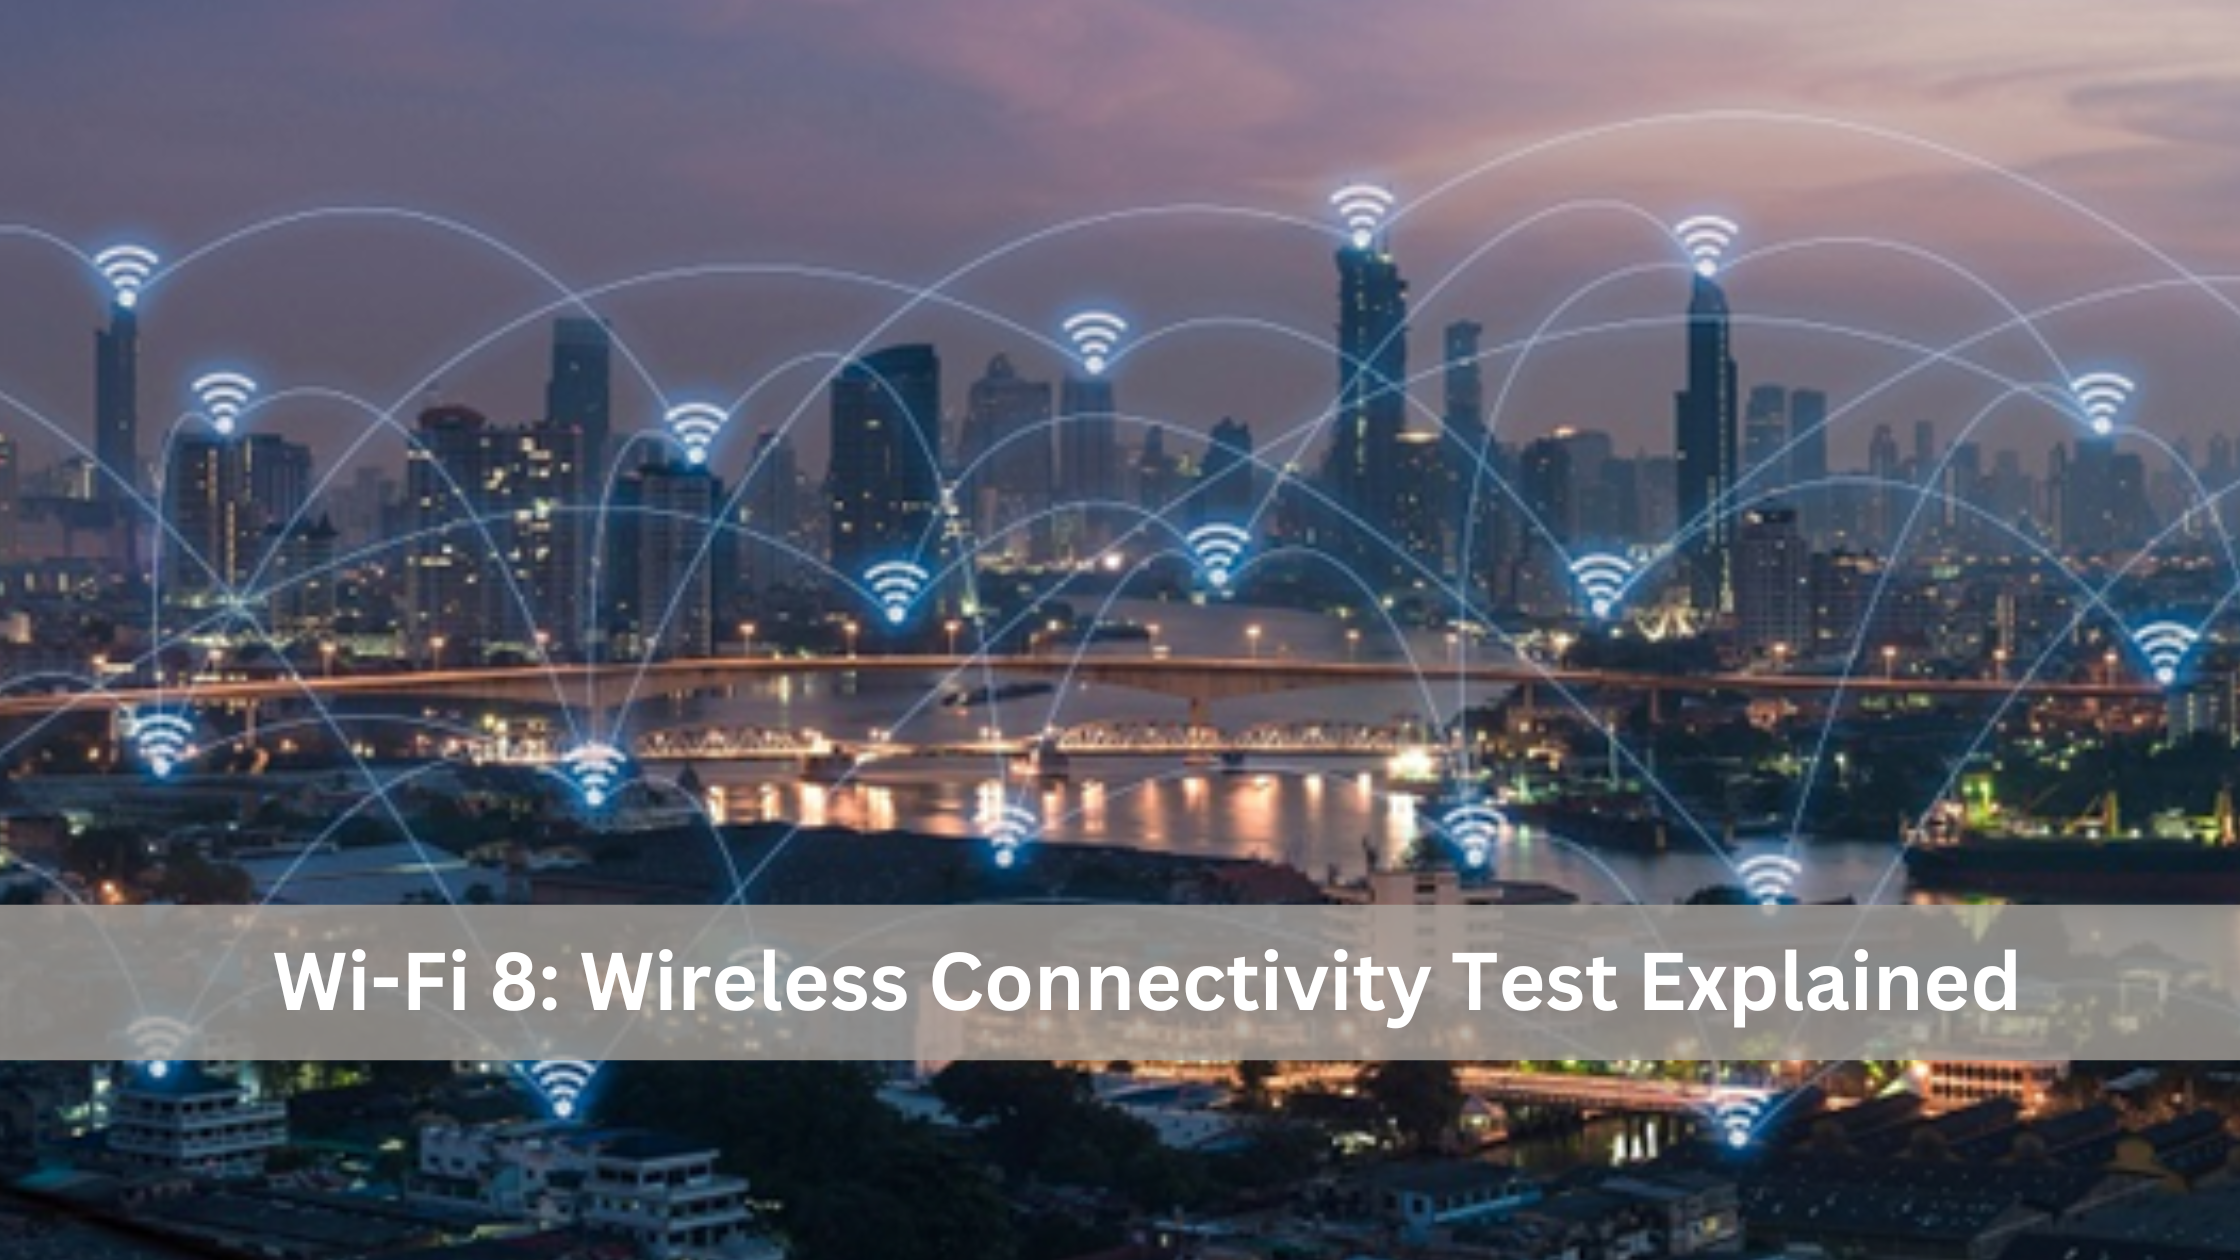 Wi-Fi 8 - Wireless Connectivity Test Explained